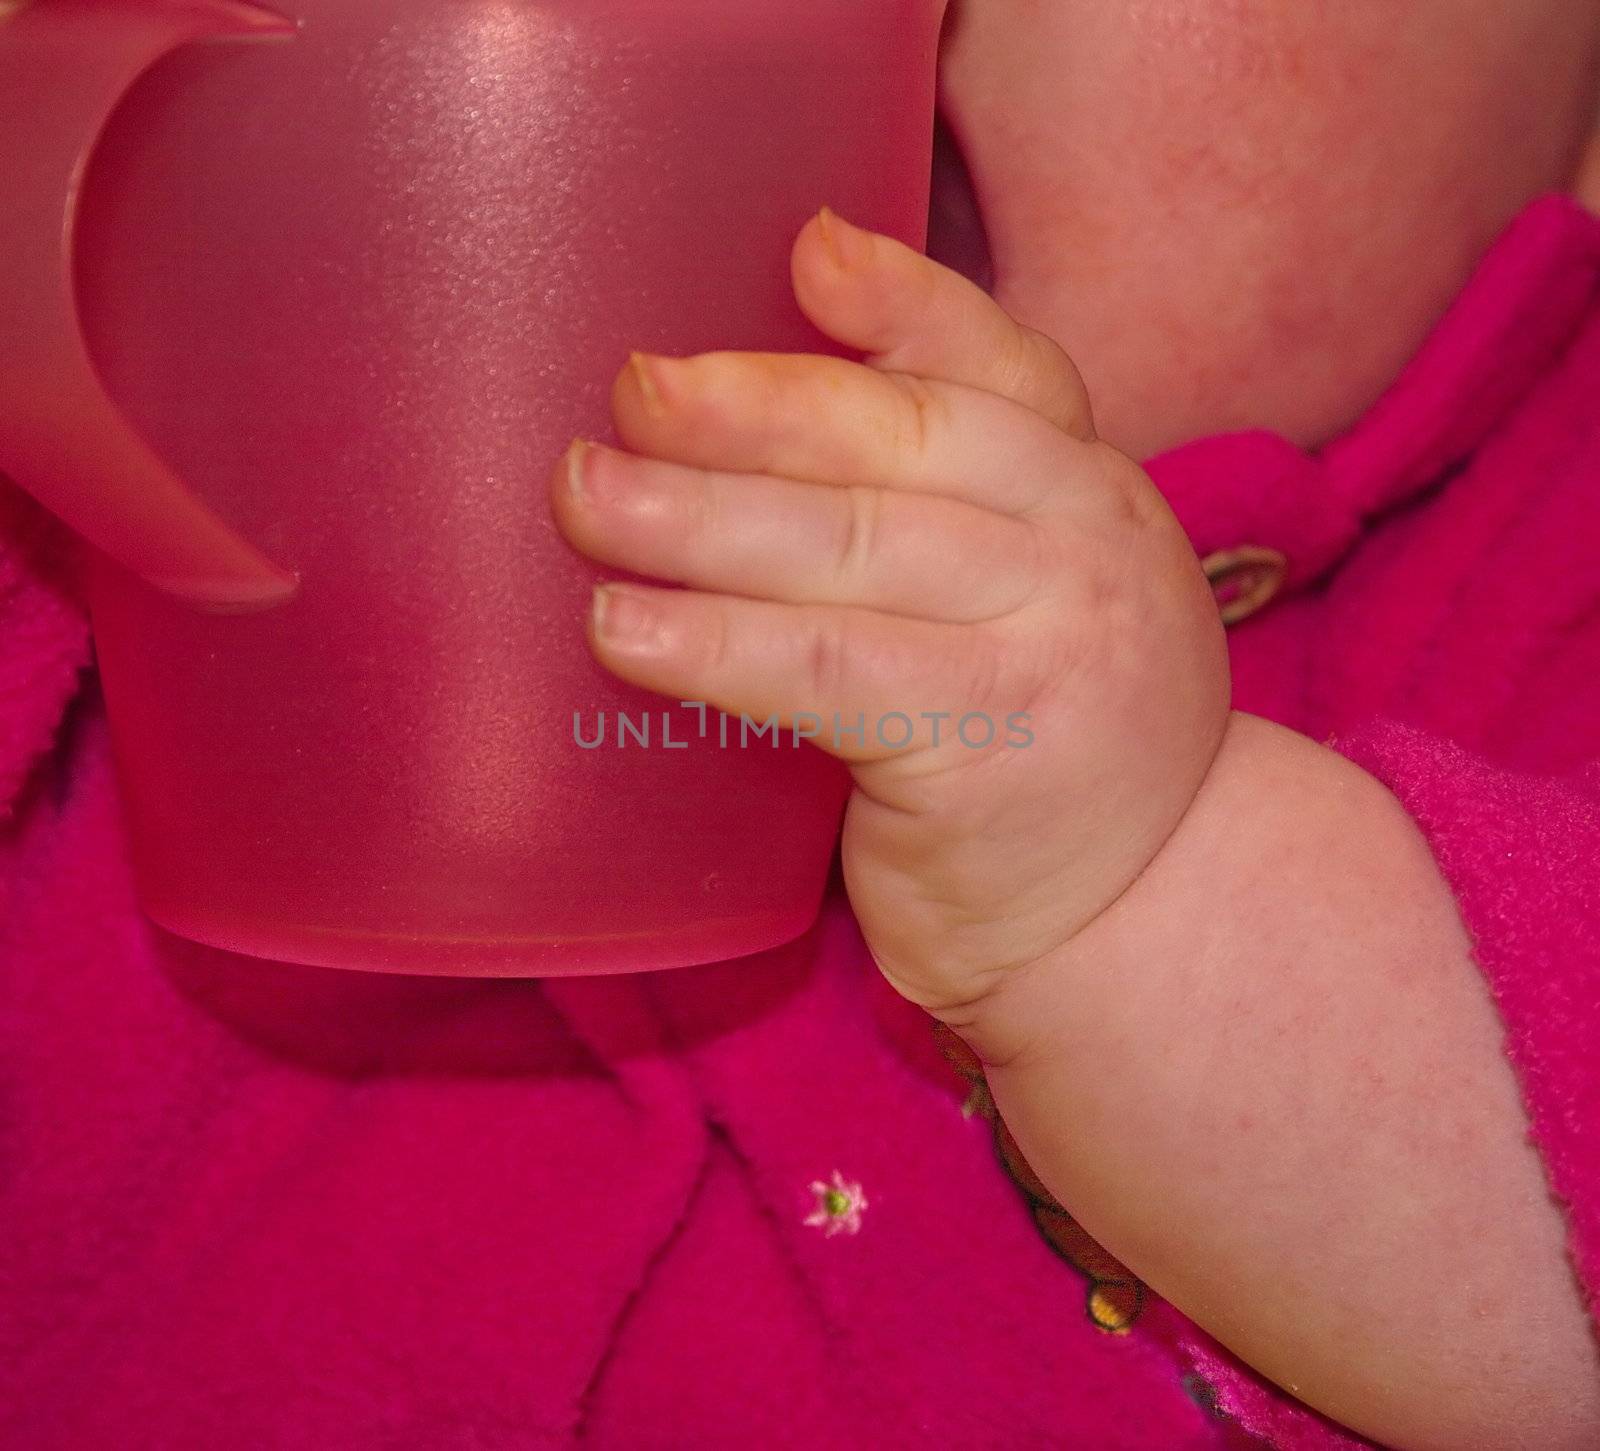 babies chubby hands holding a large cup by leafy